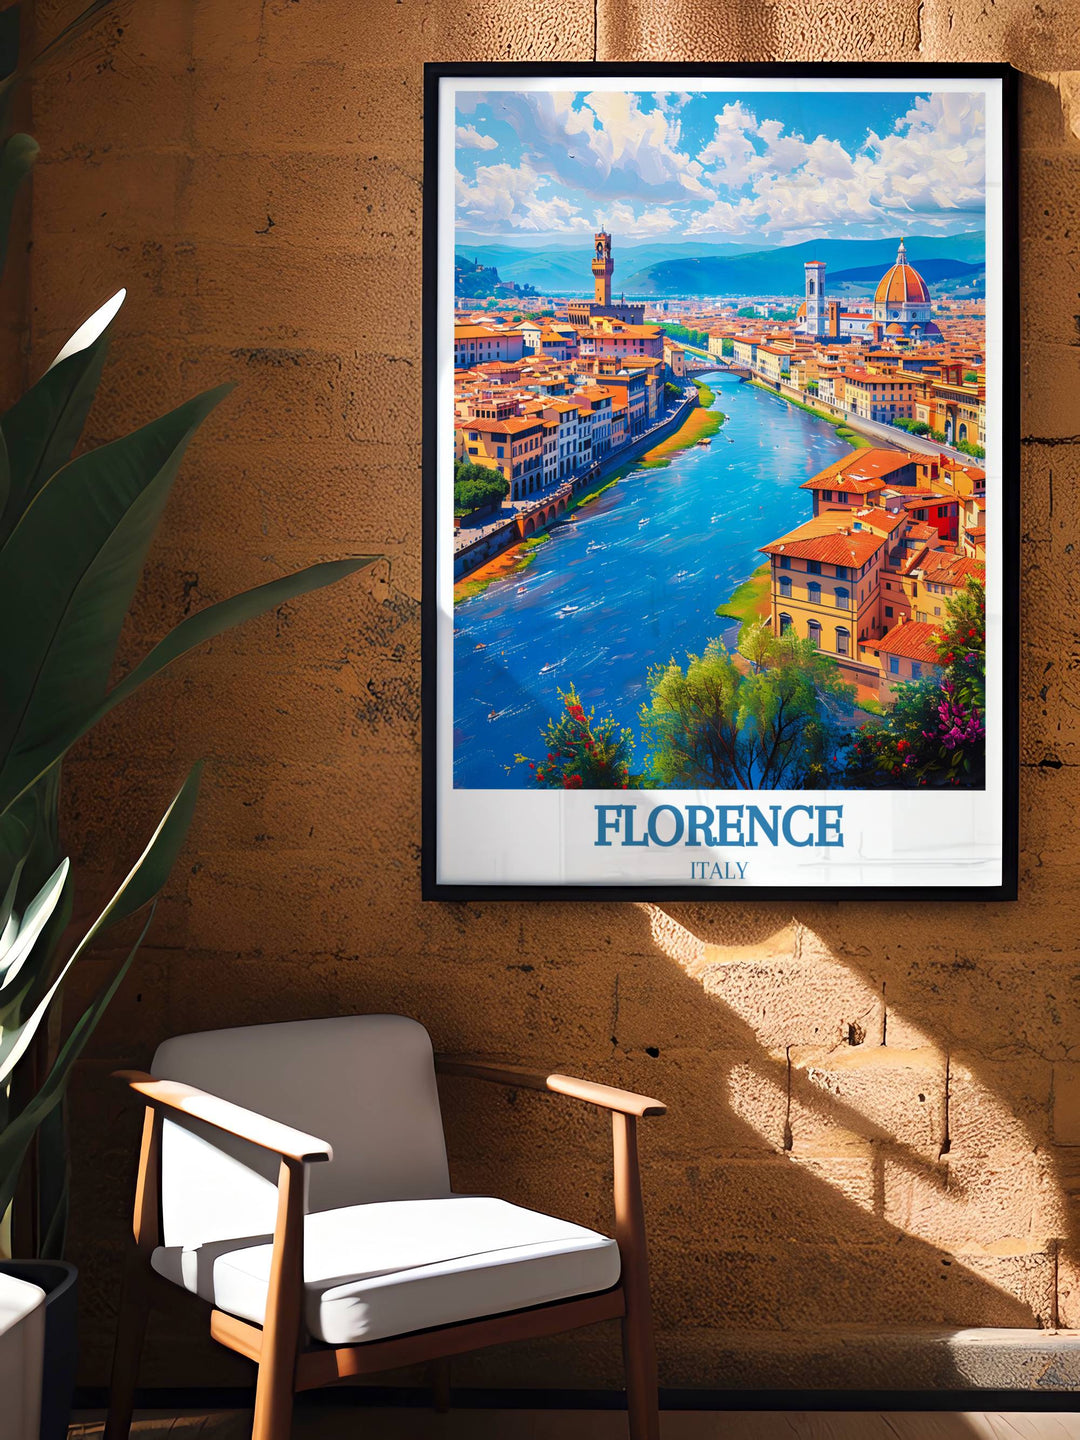 Wall Art capturing the grandiosity of the Uffizi Gallery, inviting viewers to explore the depths of Renaissance art within Florences walls.